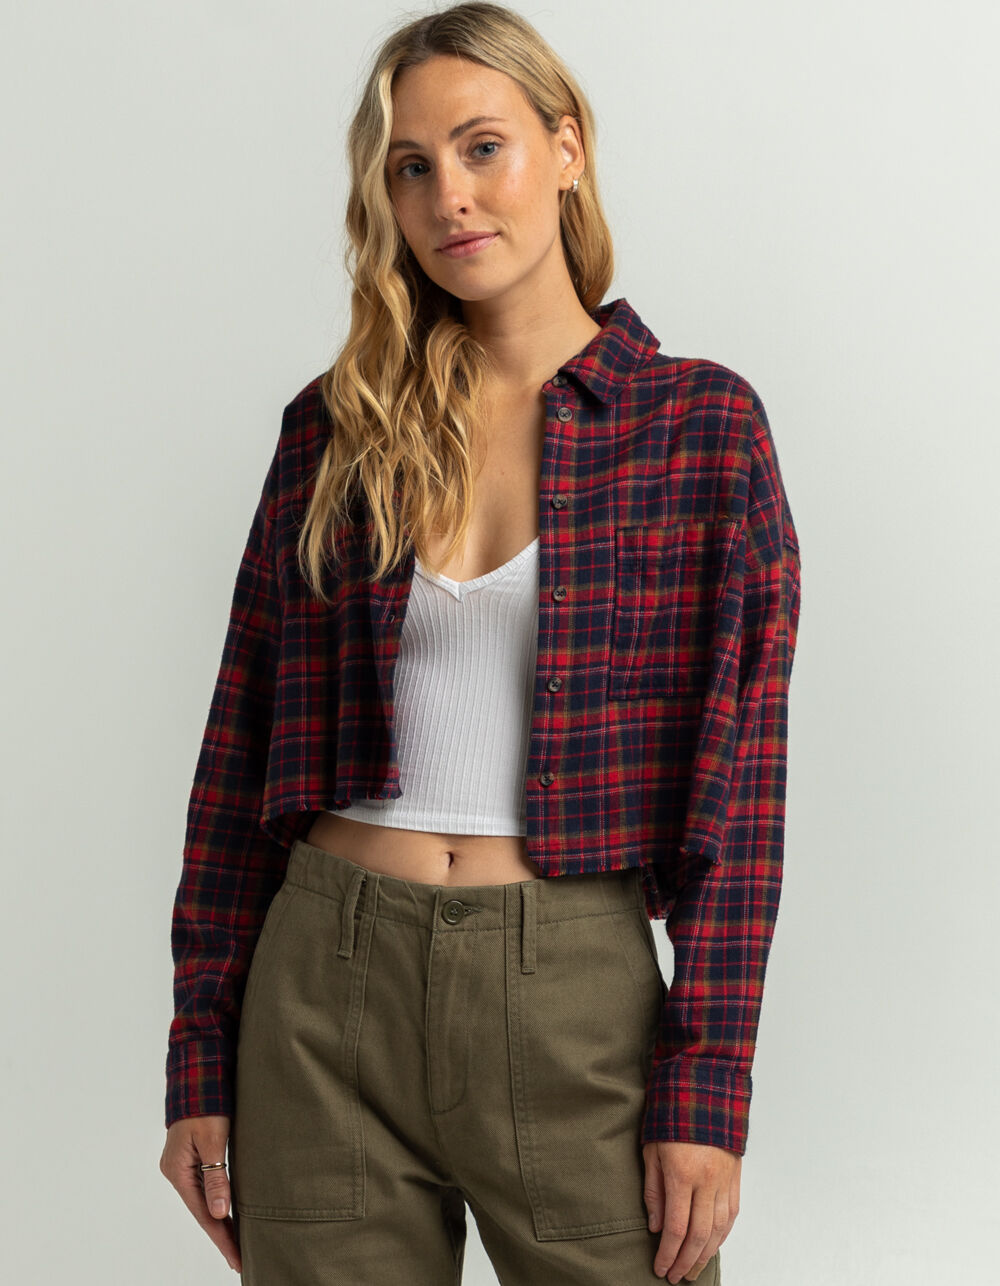 BDG Urban Outfitters Brendan Womens Cropped Flannel - PLAID | Tillys